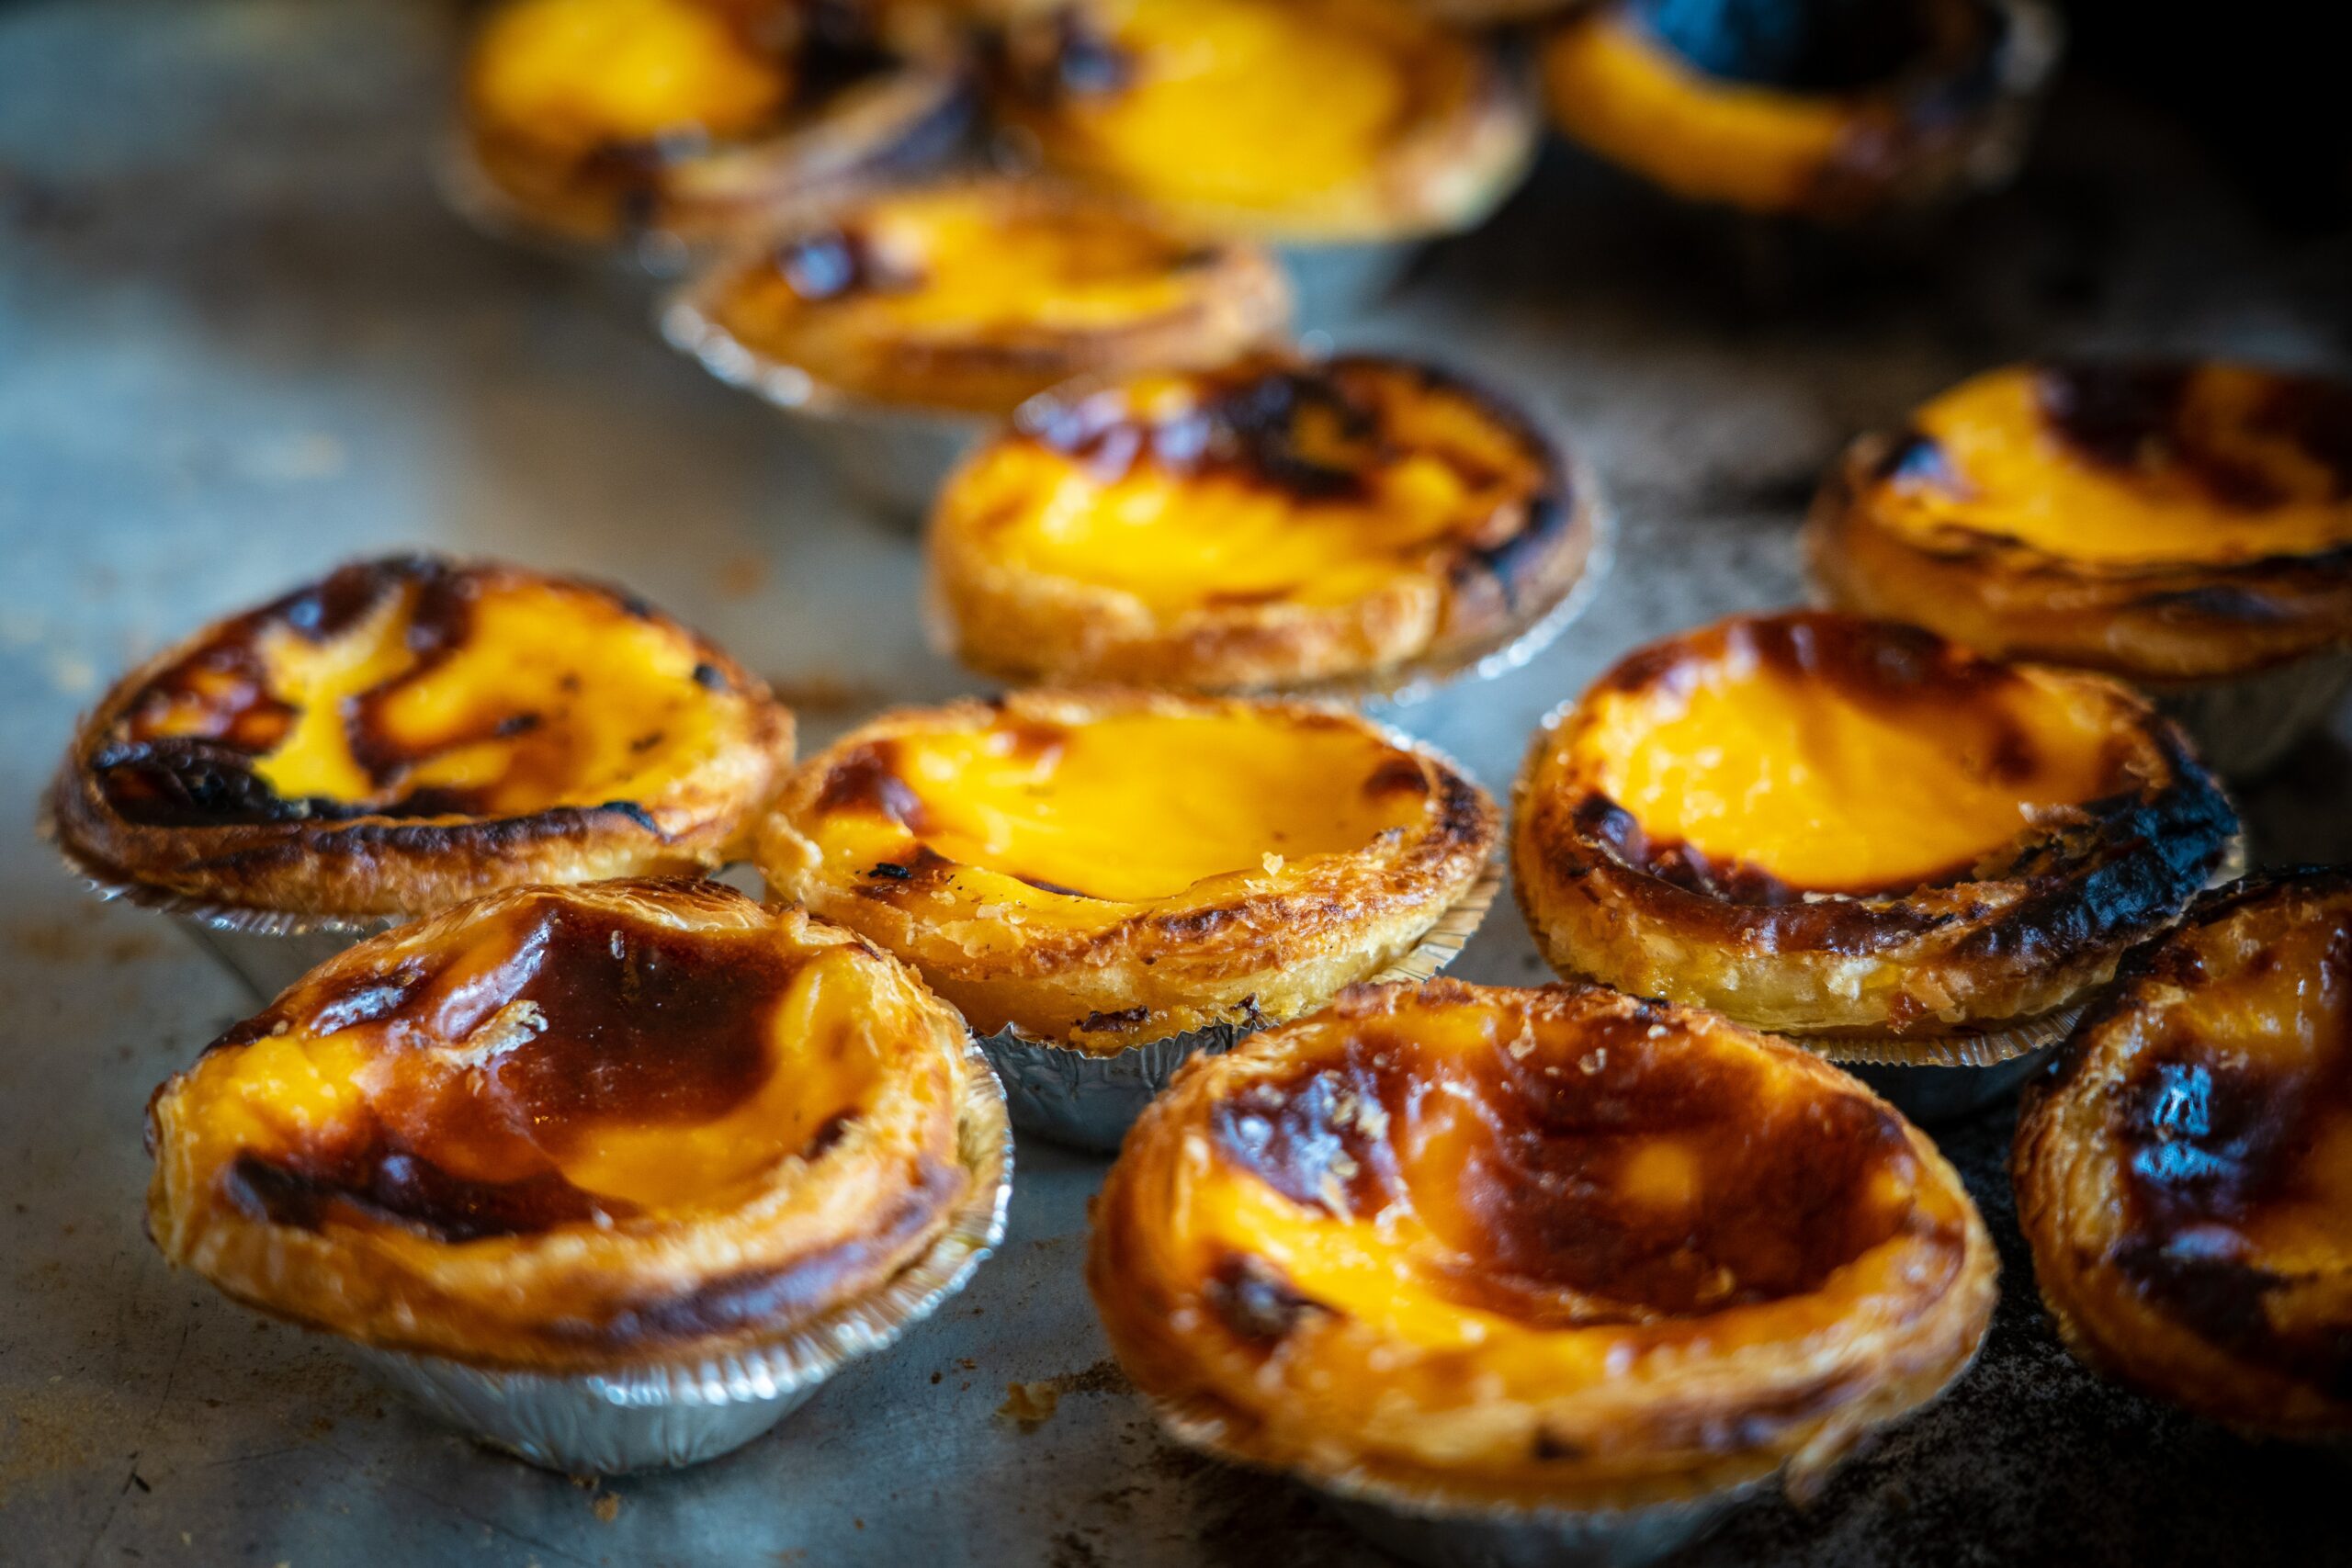 A typical pastry of portugal